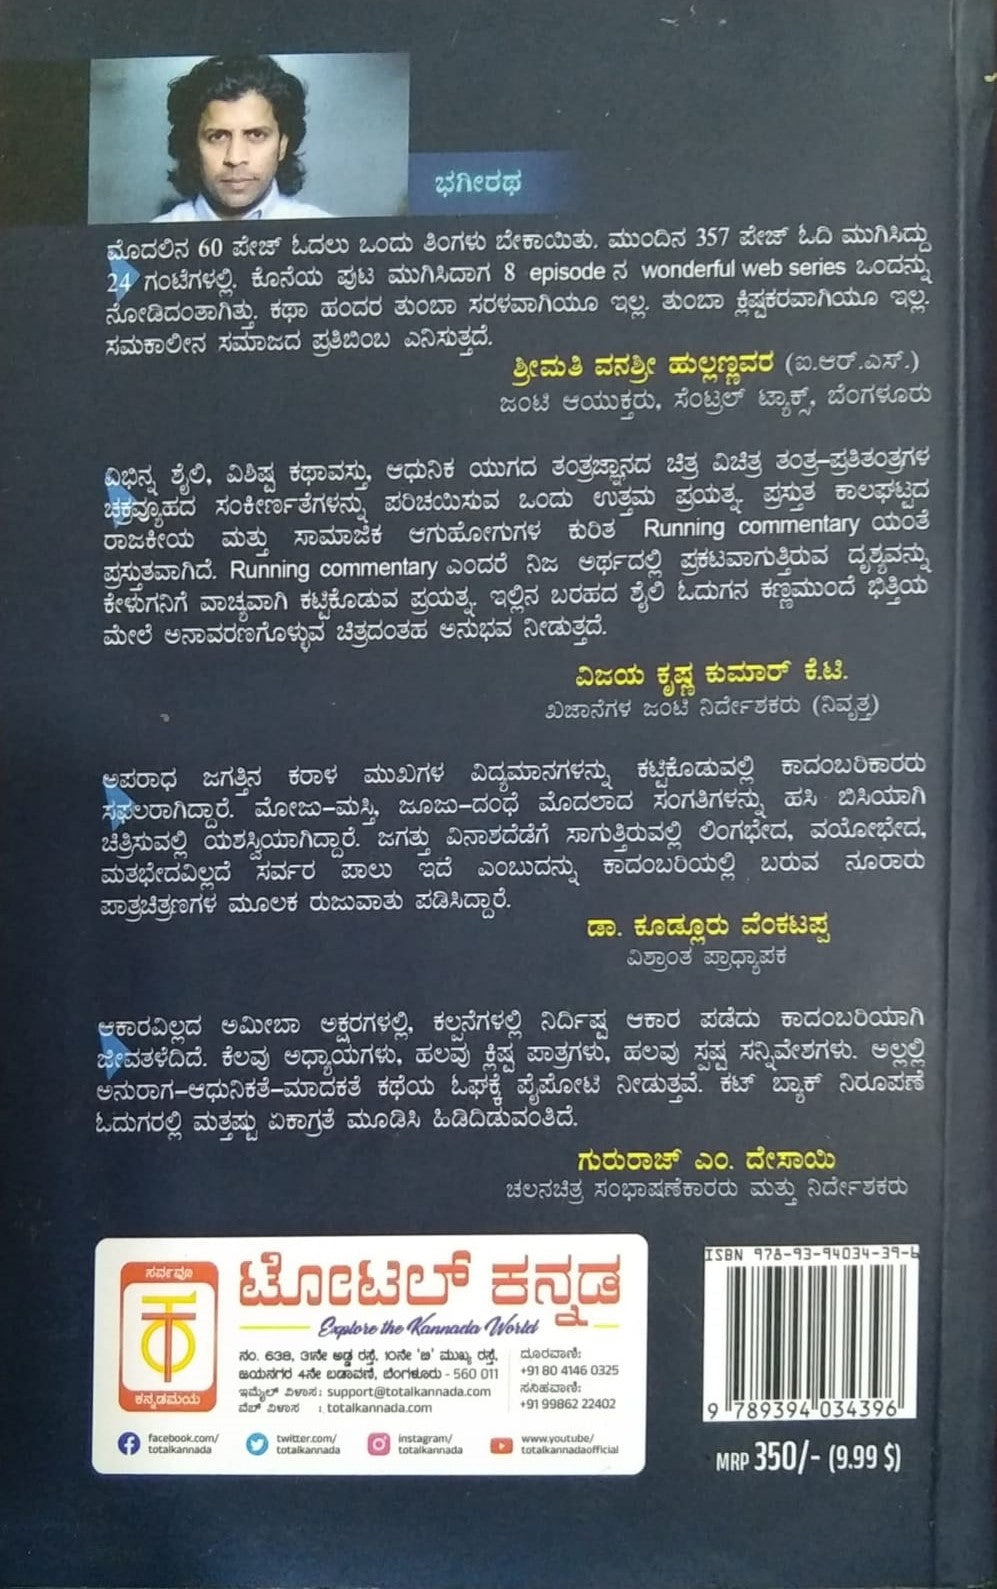 Ameeba is Kannada Novel which is a Written by Bhageerata and Published by Total Kannada